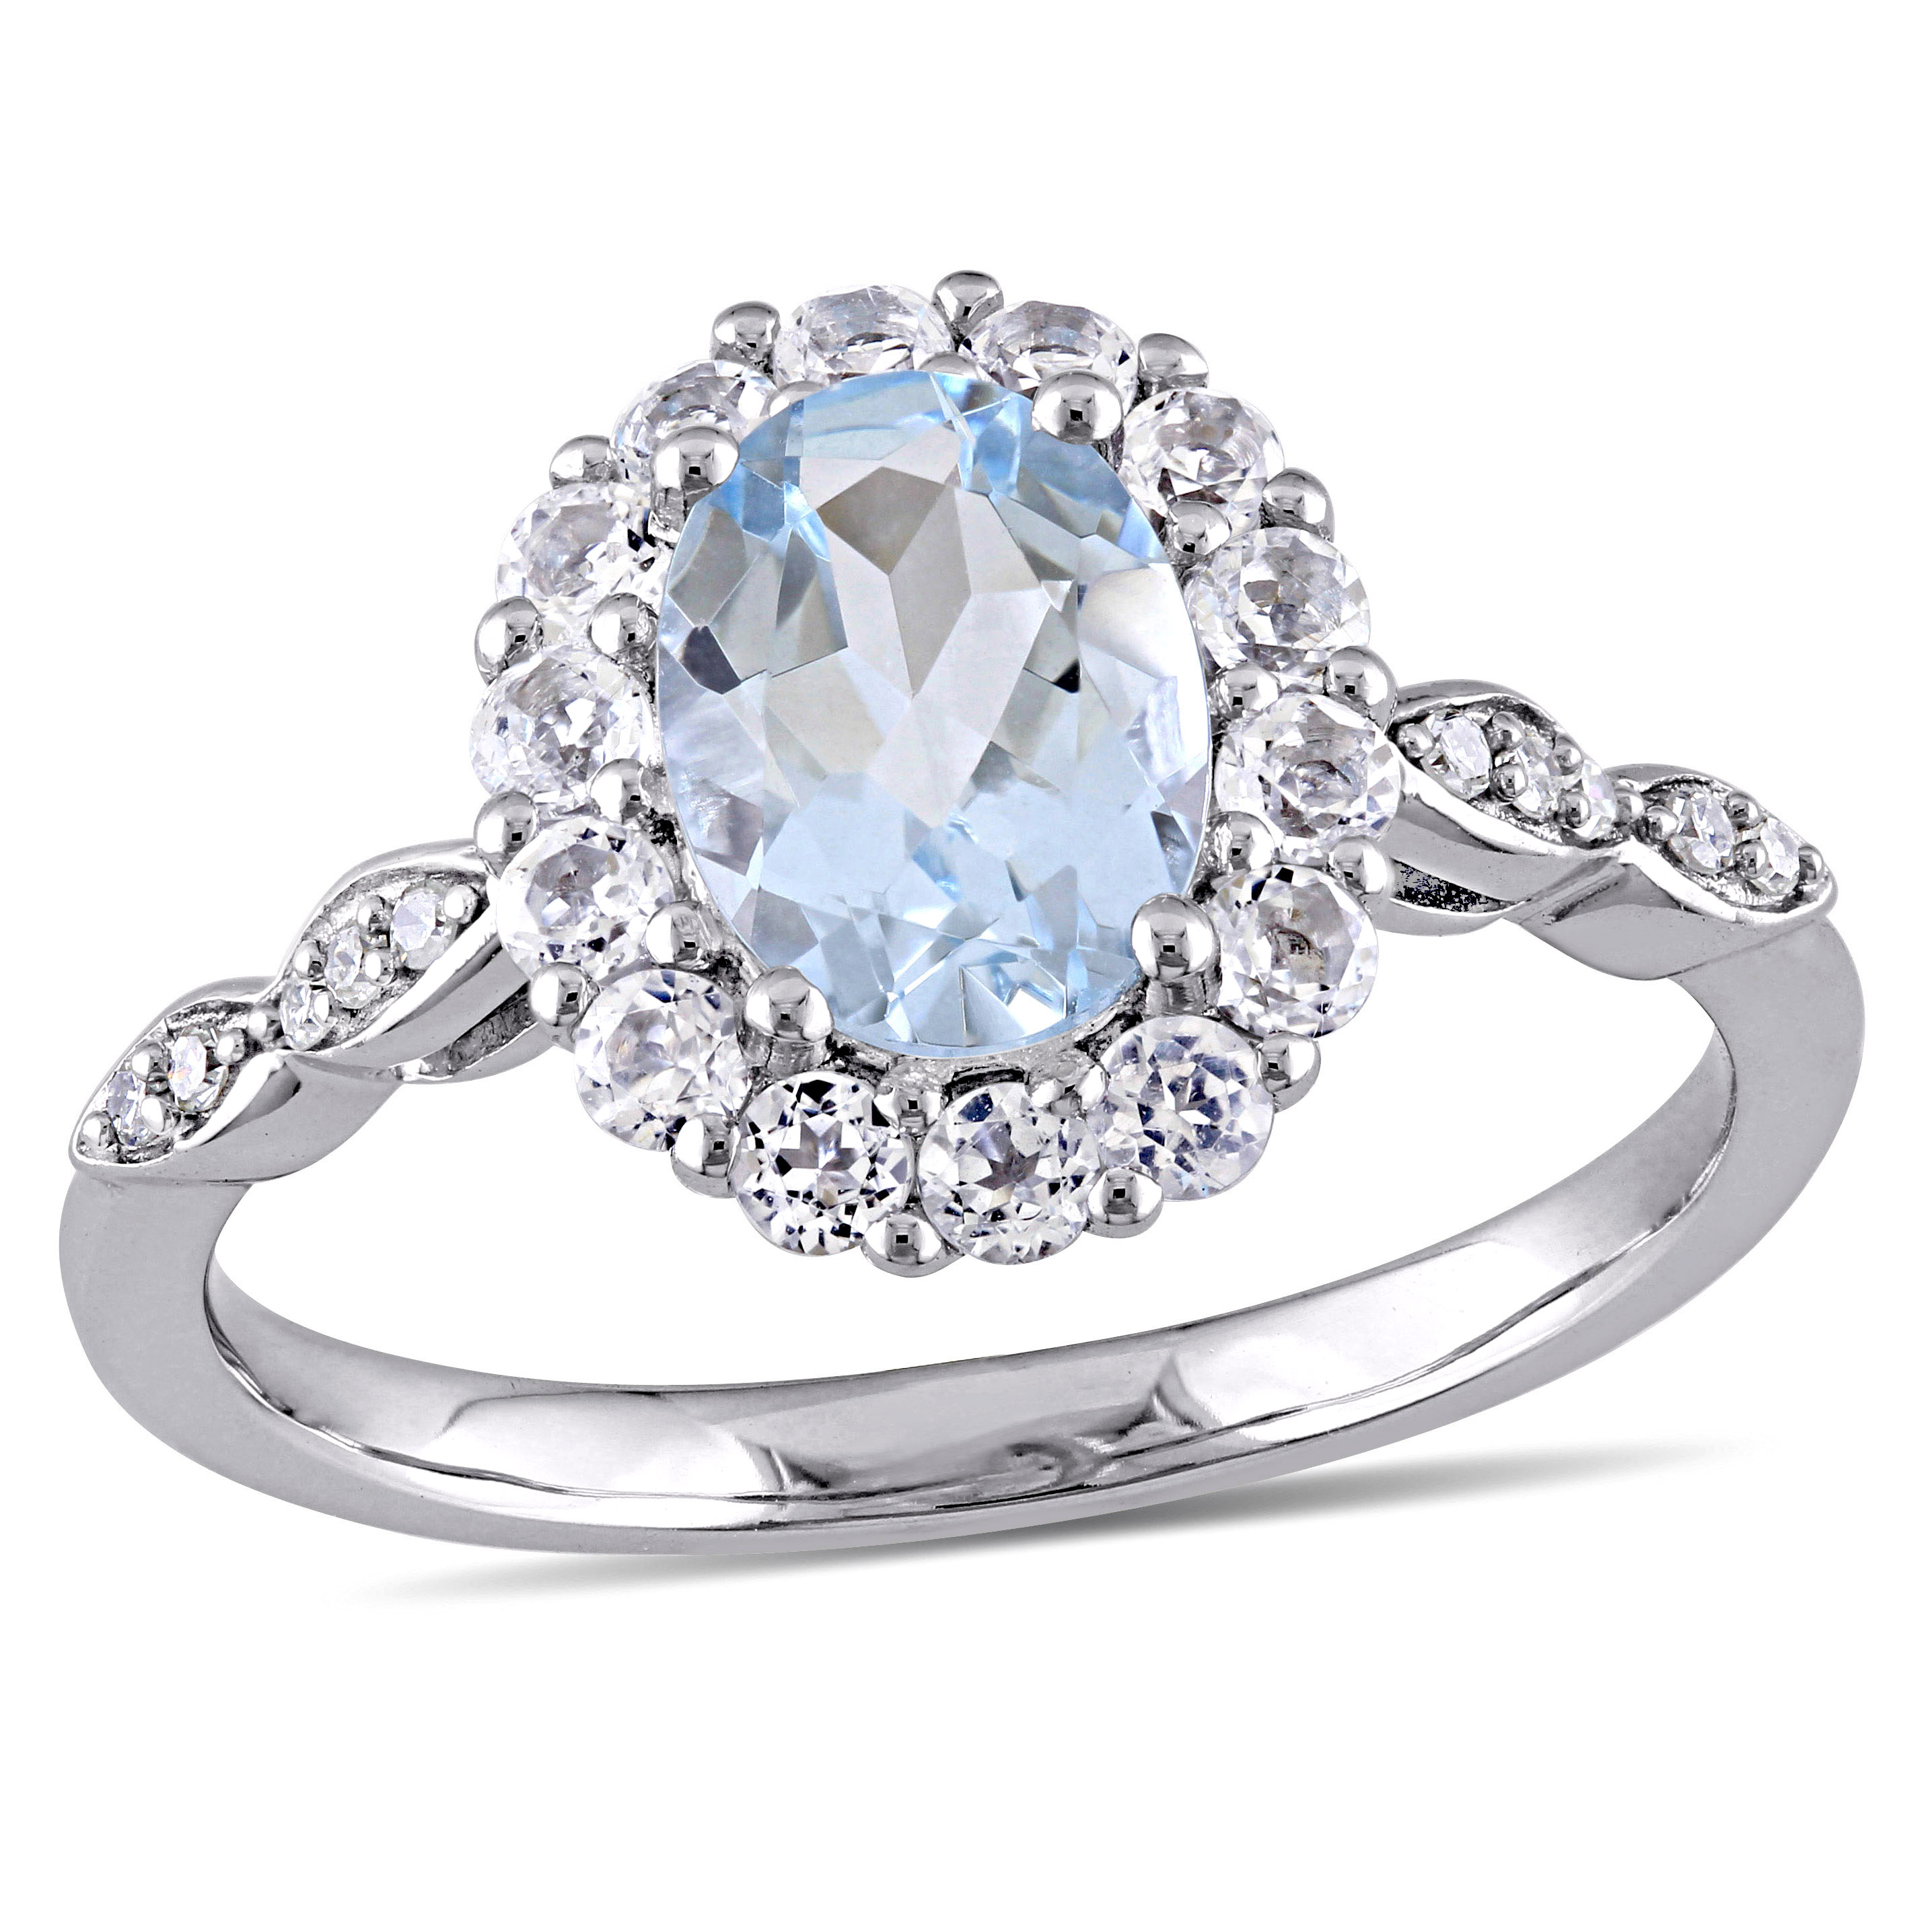 Oval Shape Aquamarine, White Topaz and Diamond Accent Vintage Ring in 14k White Gold